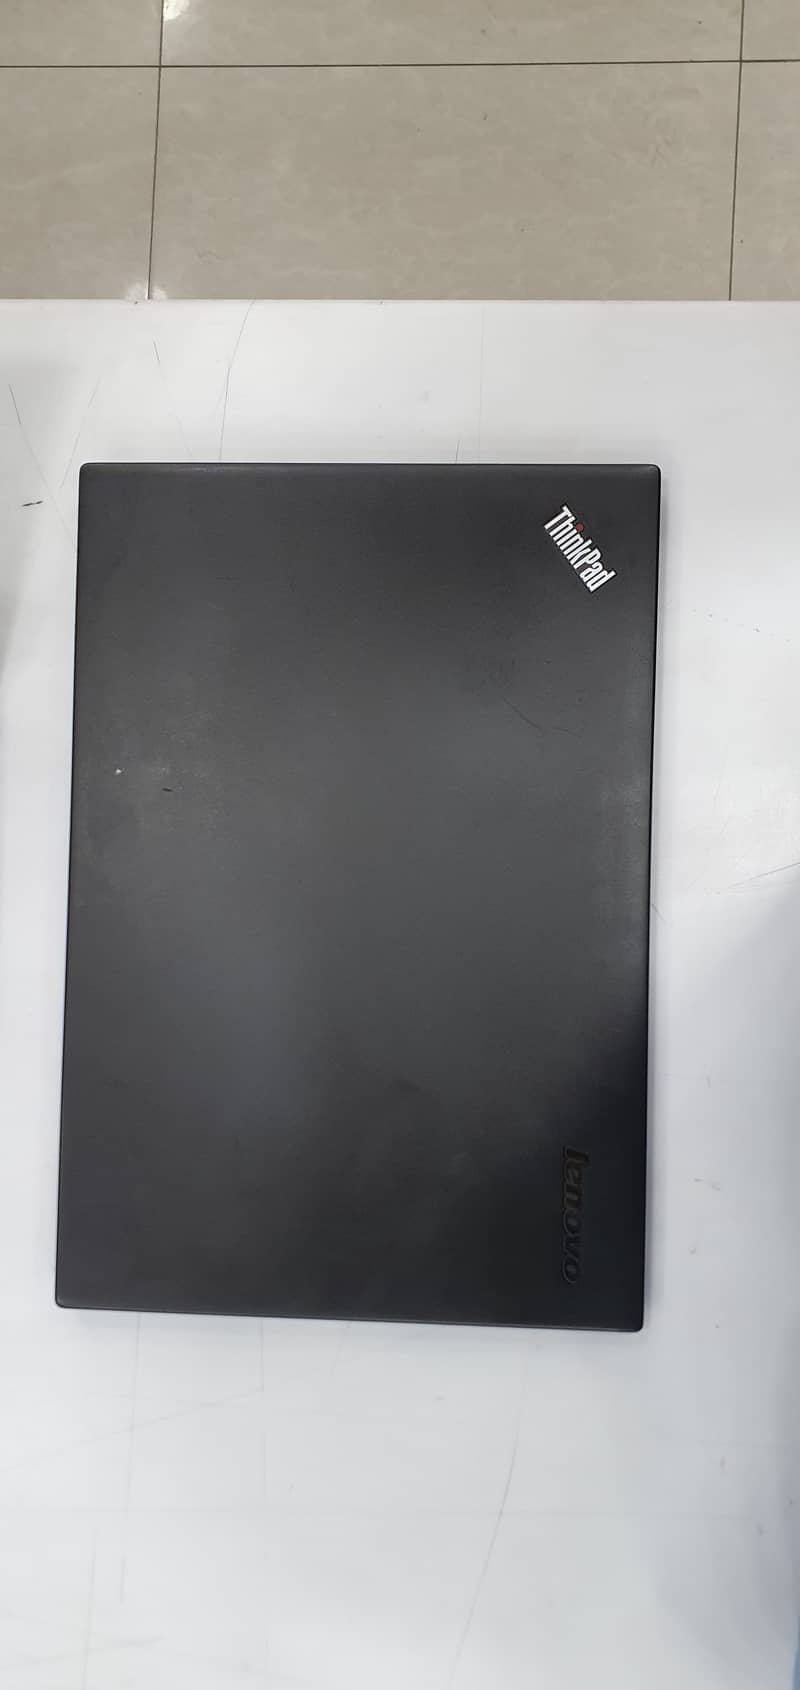 Lenovo x1 carbon g2 2k screen with touch bar Laptop for sale 6